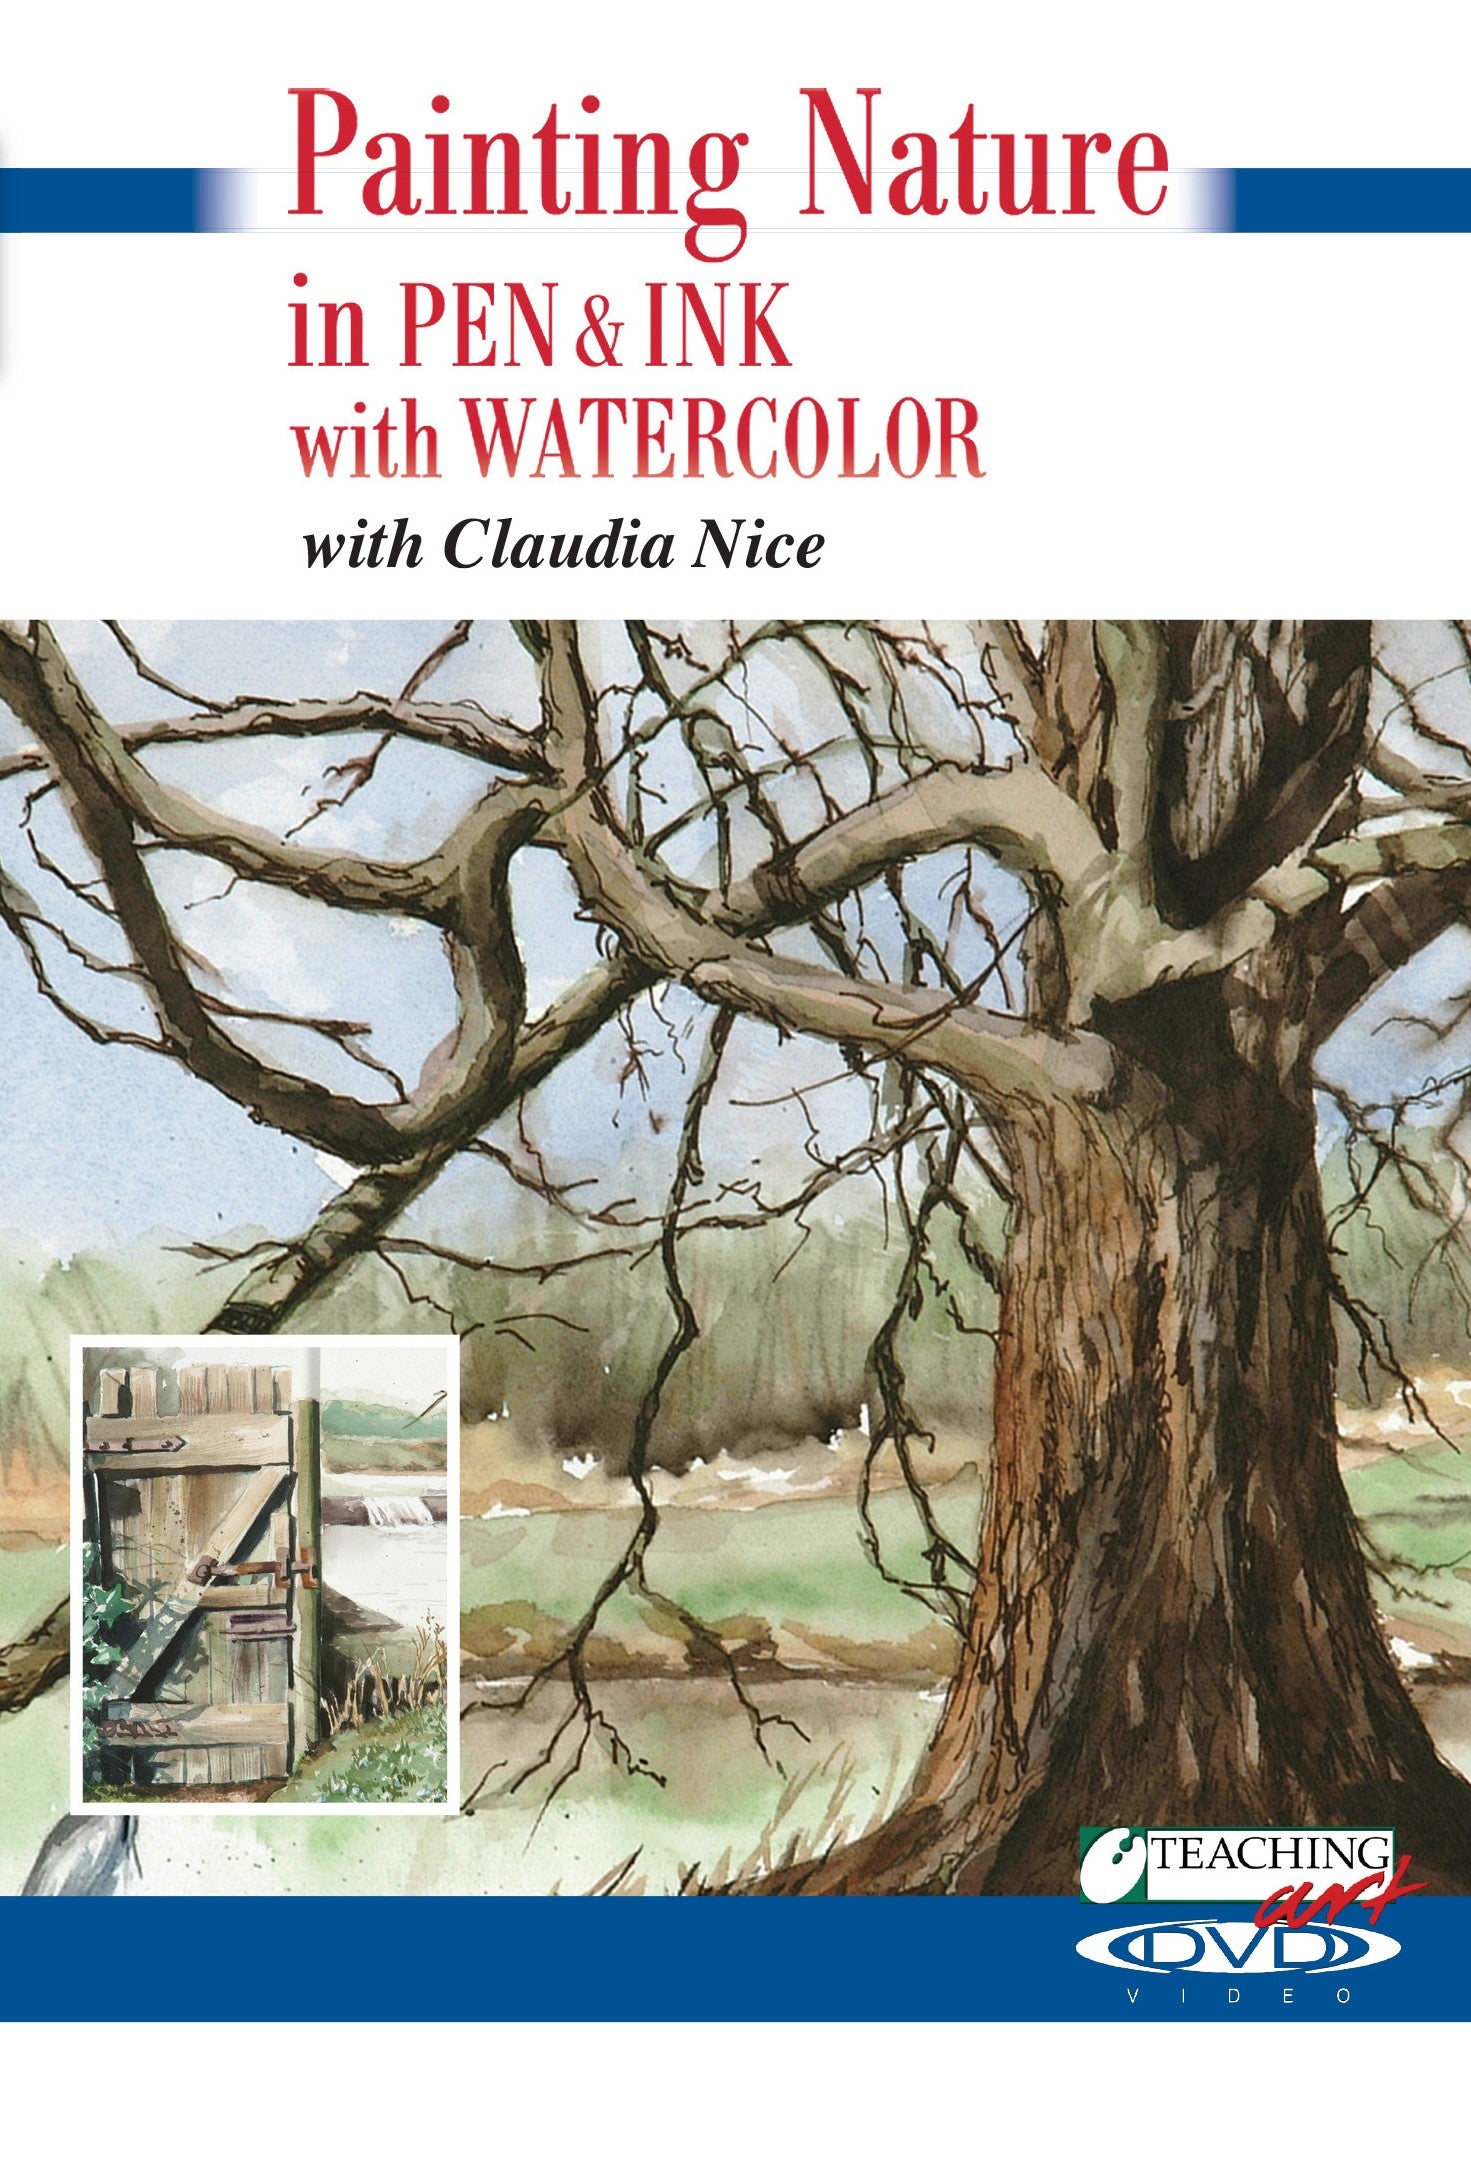 Claudia Nice: Painting Nature in Pen & Ink with Watercolor